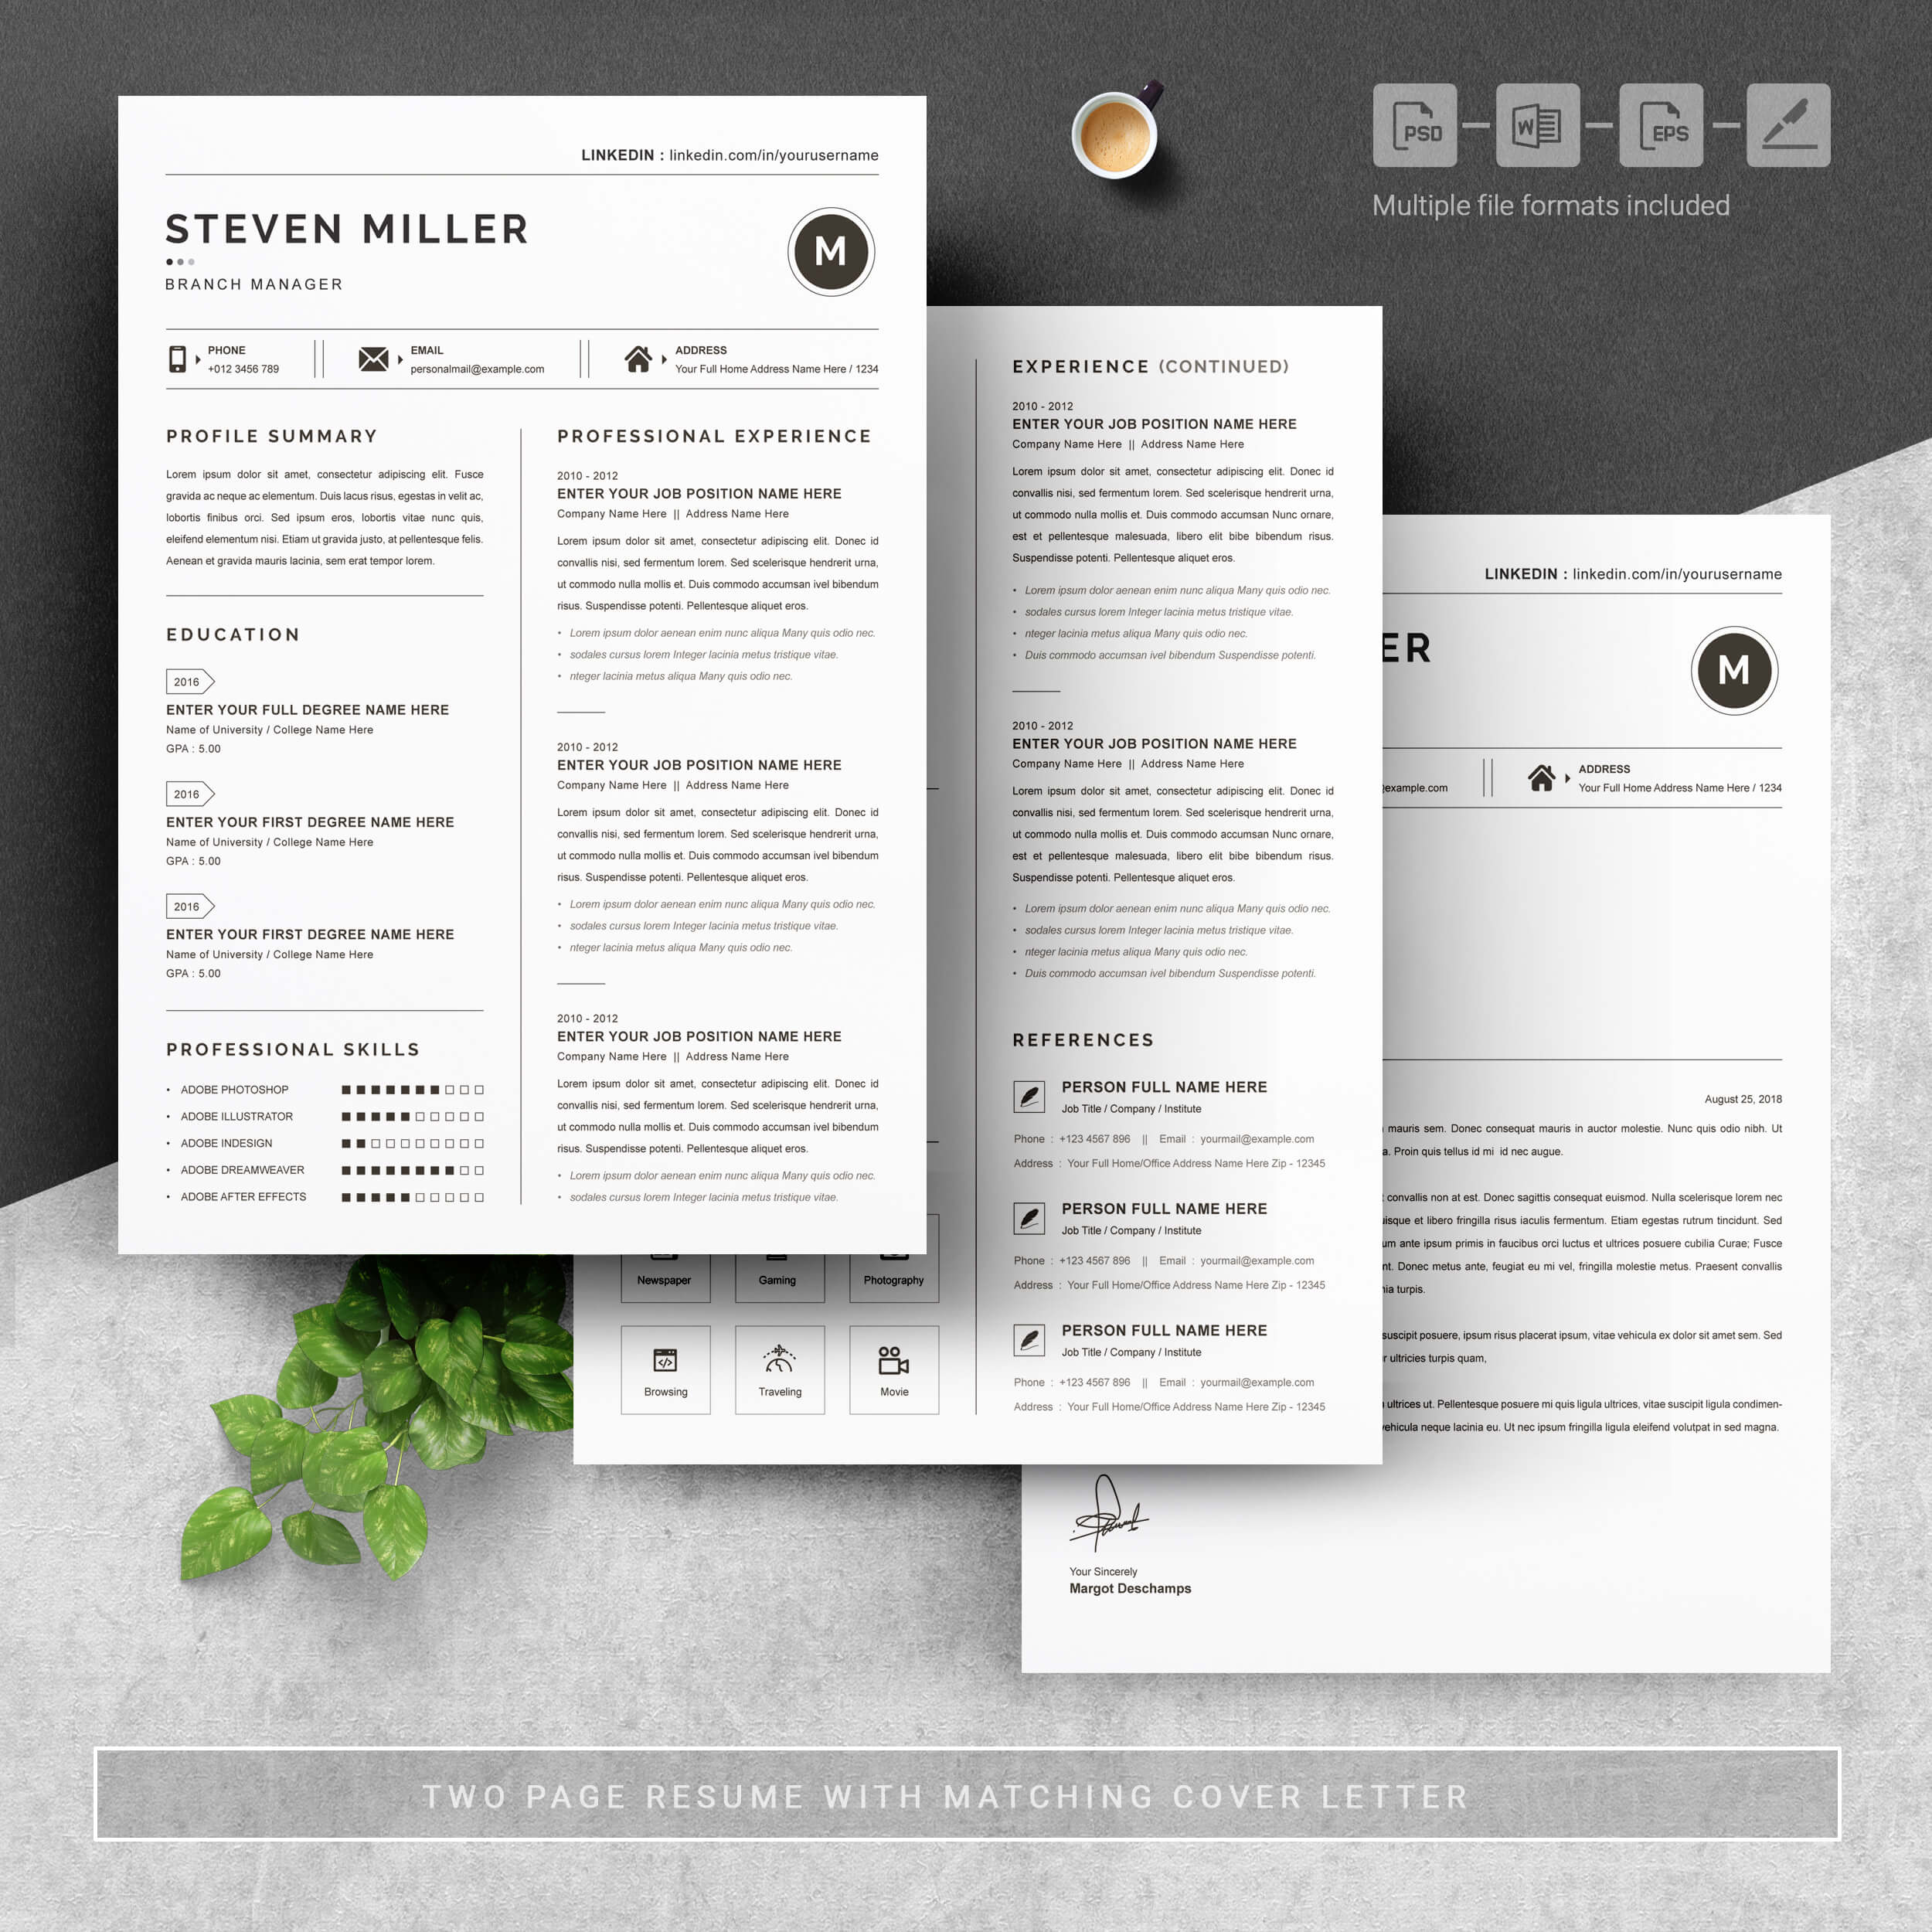 04 3 pages free resume design template 1 186